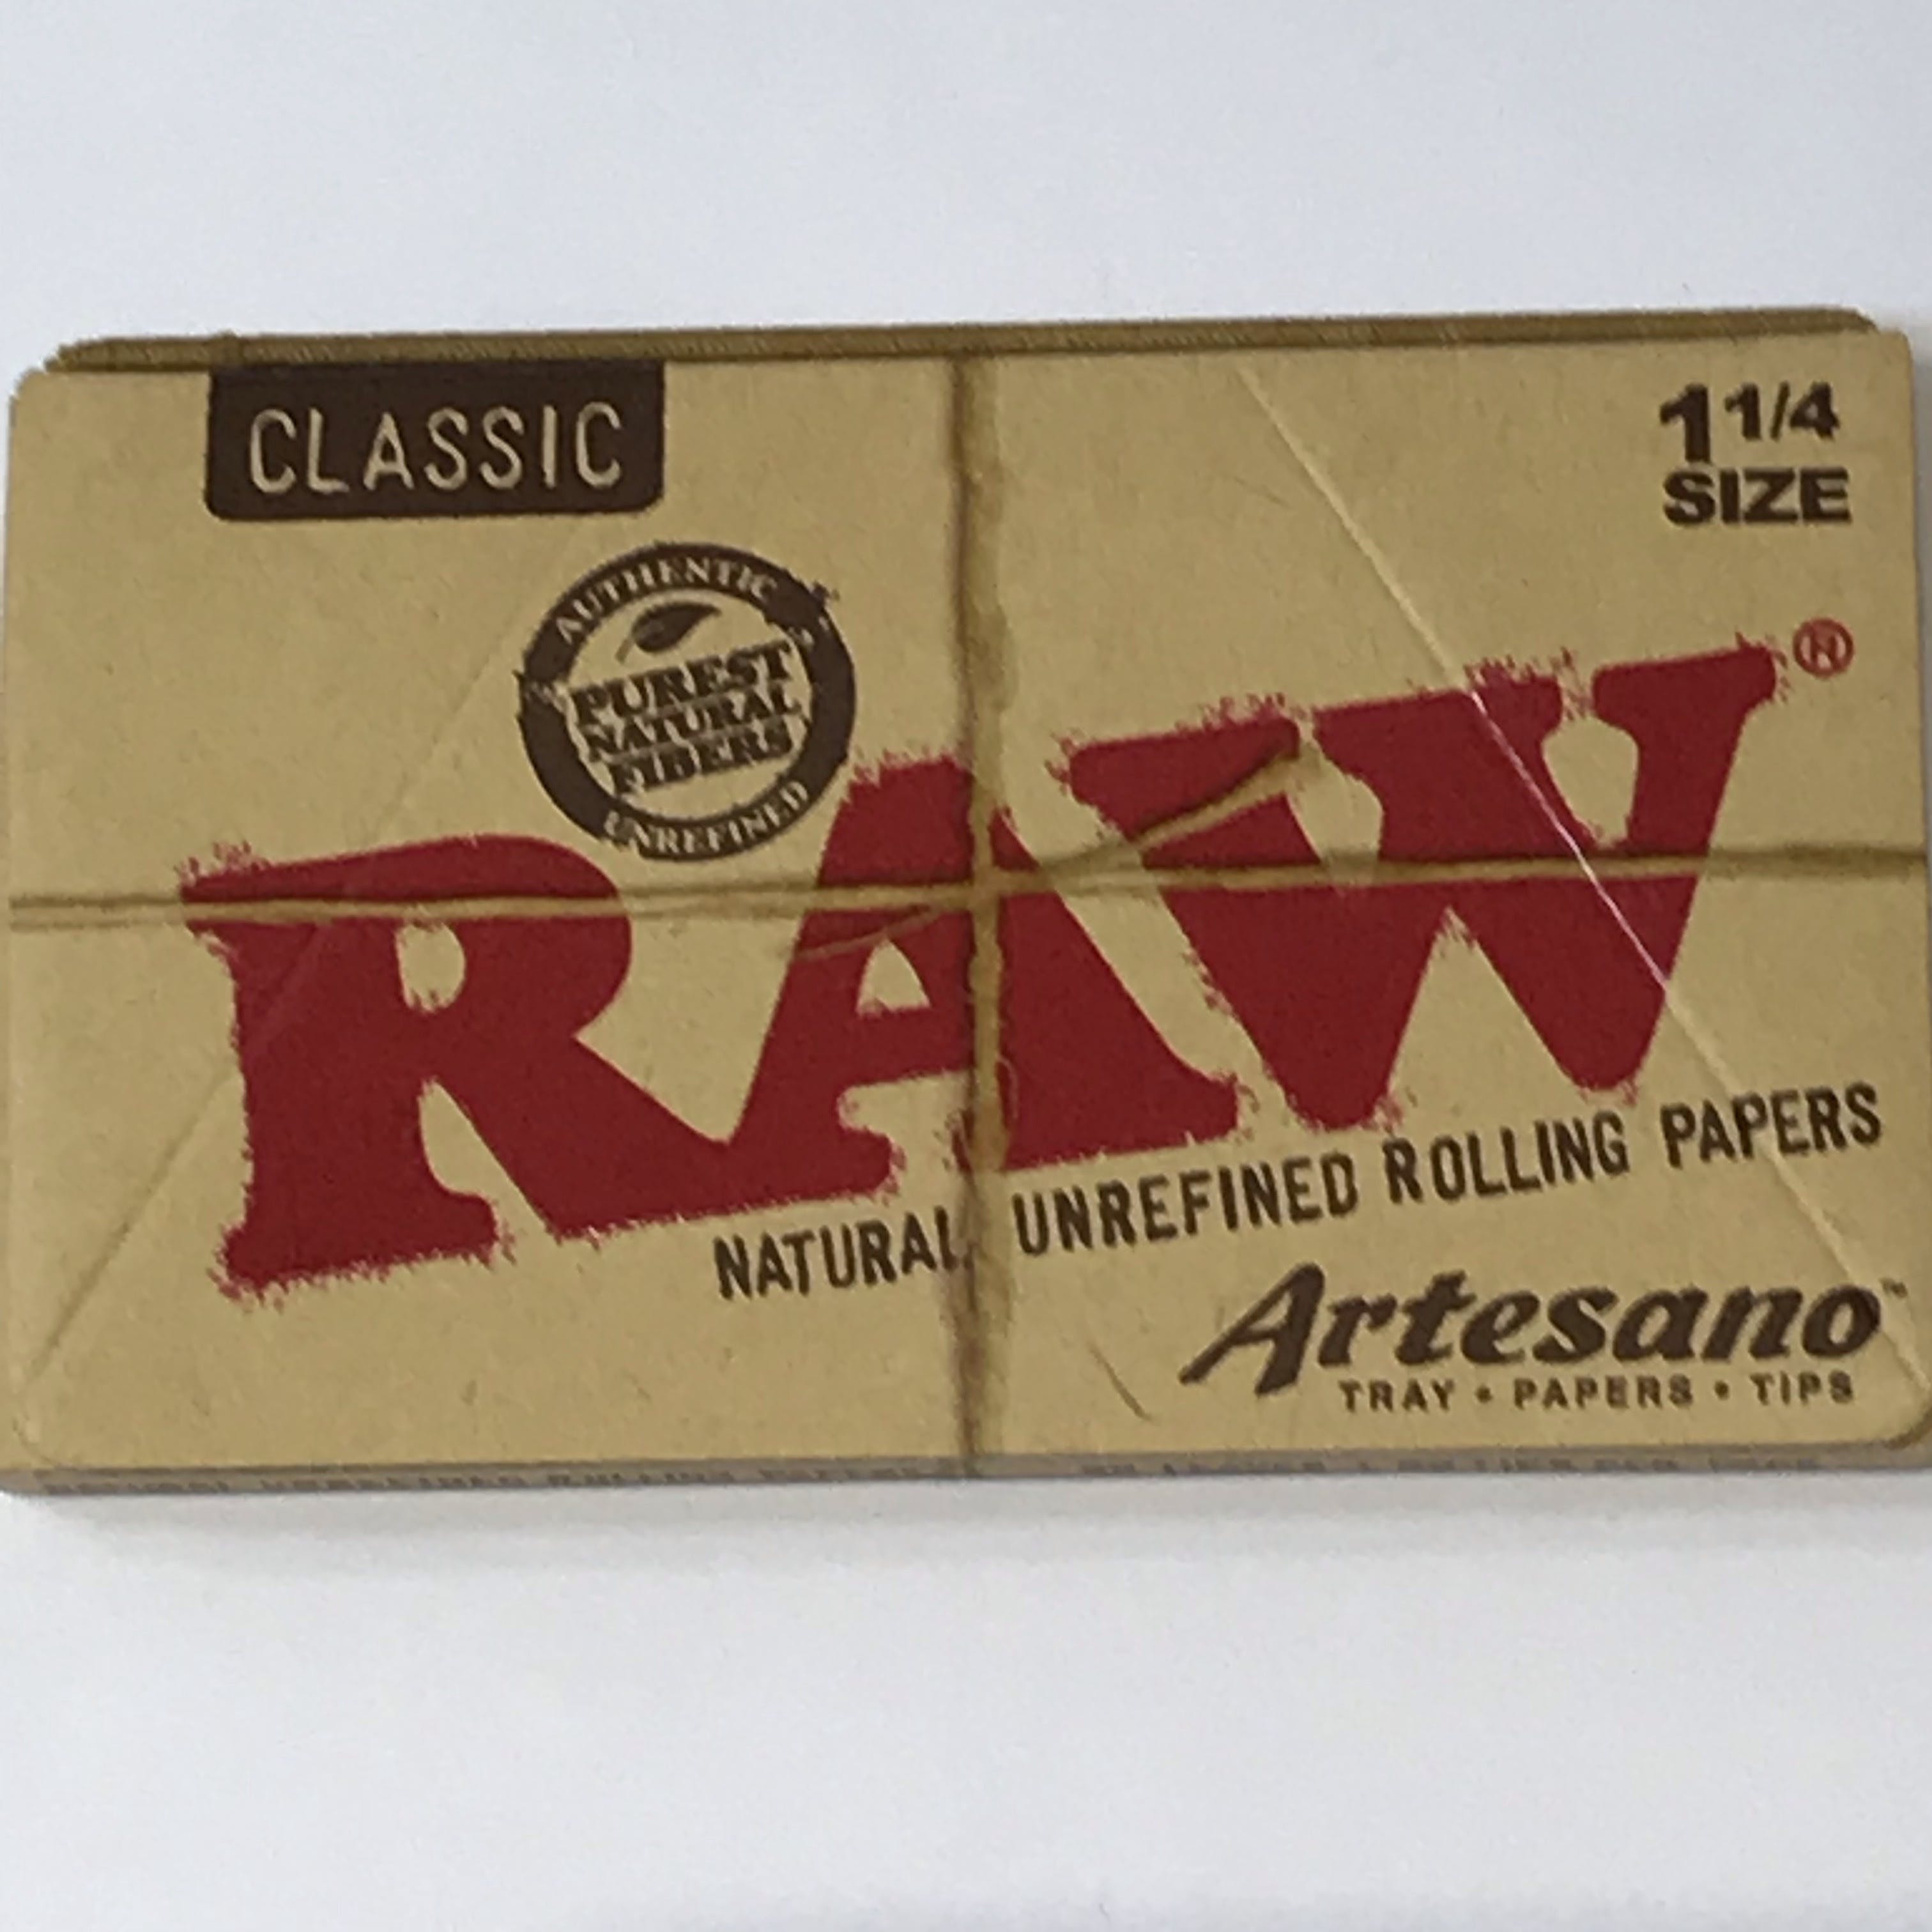 RAW Classic Papers with tips